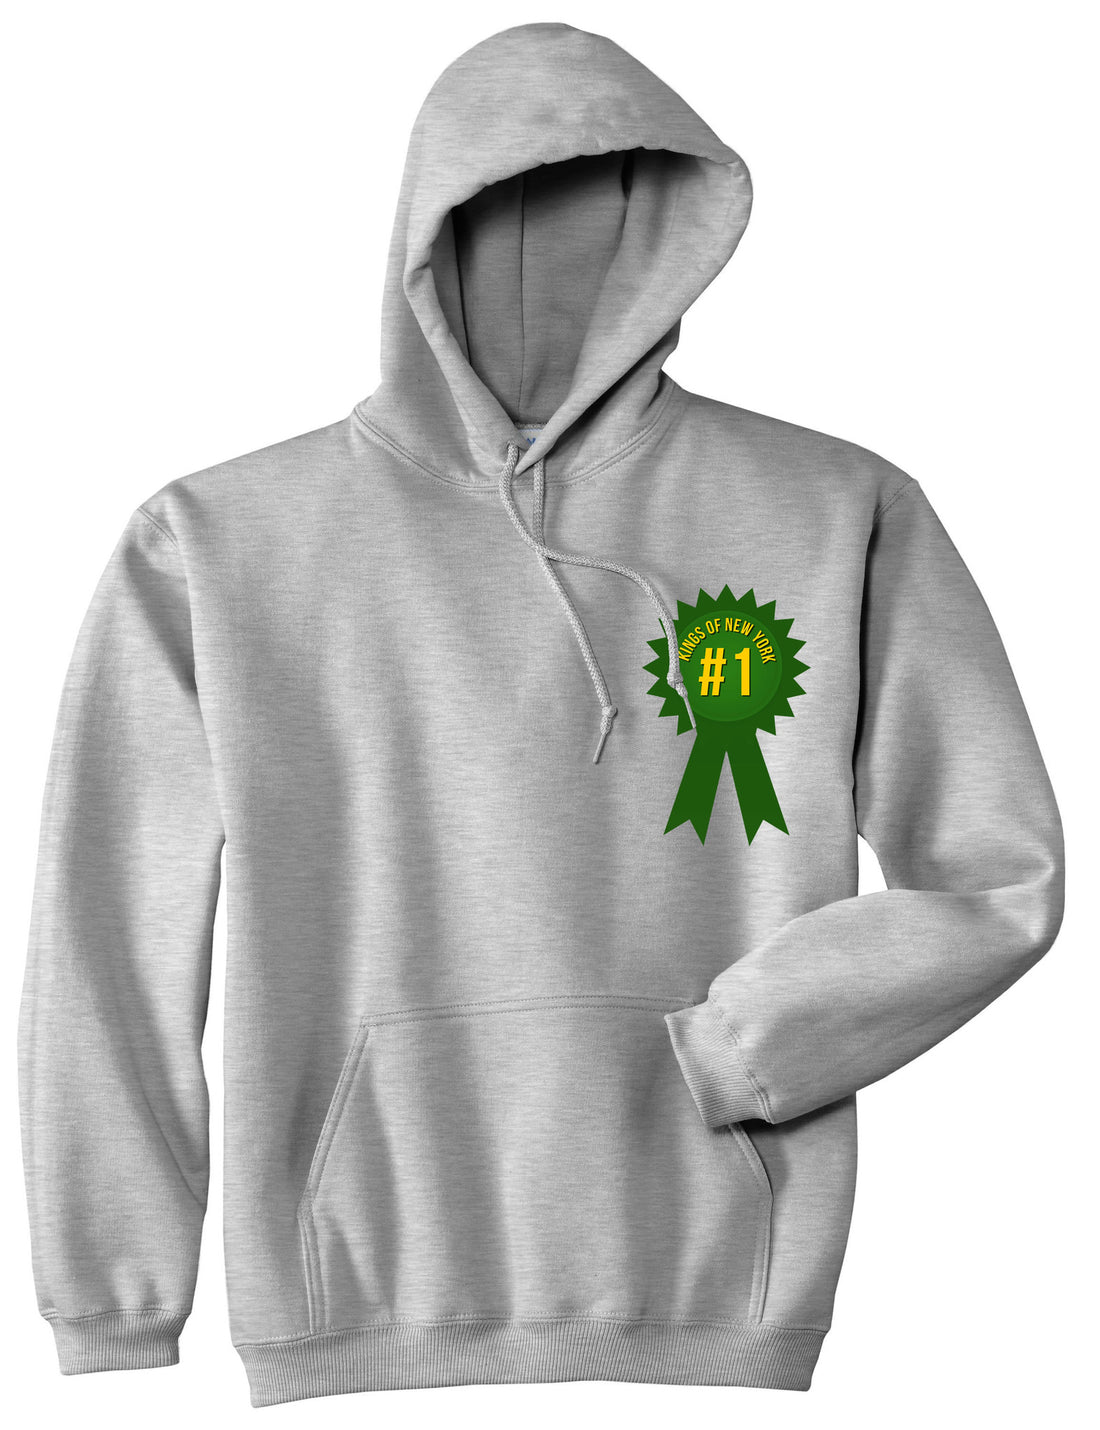 Grand Prize Champions Pullover Hoodie Hoody in Grey